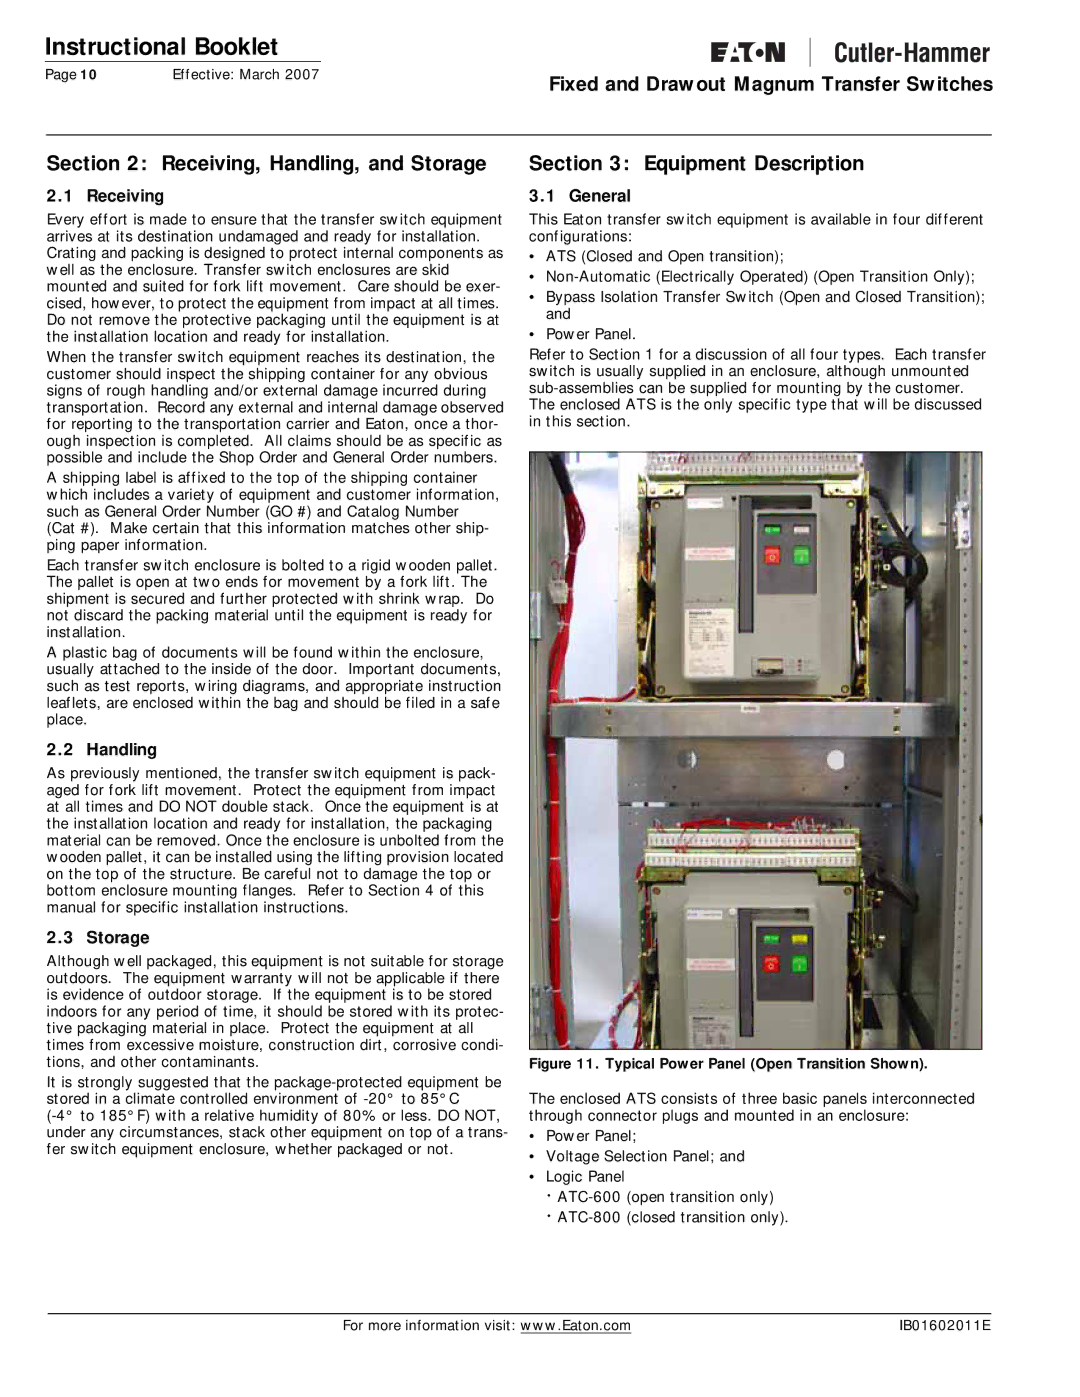 Eaton Electrical Magnum Transfer Switch manual Receiving, Handling, and Storage, Equipment Description 